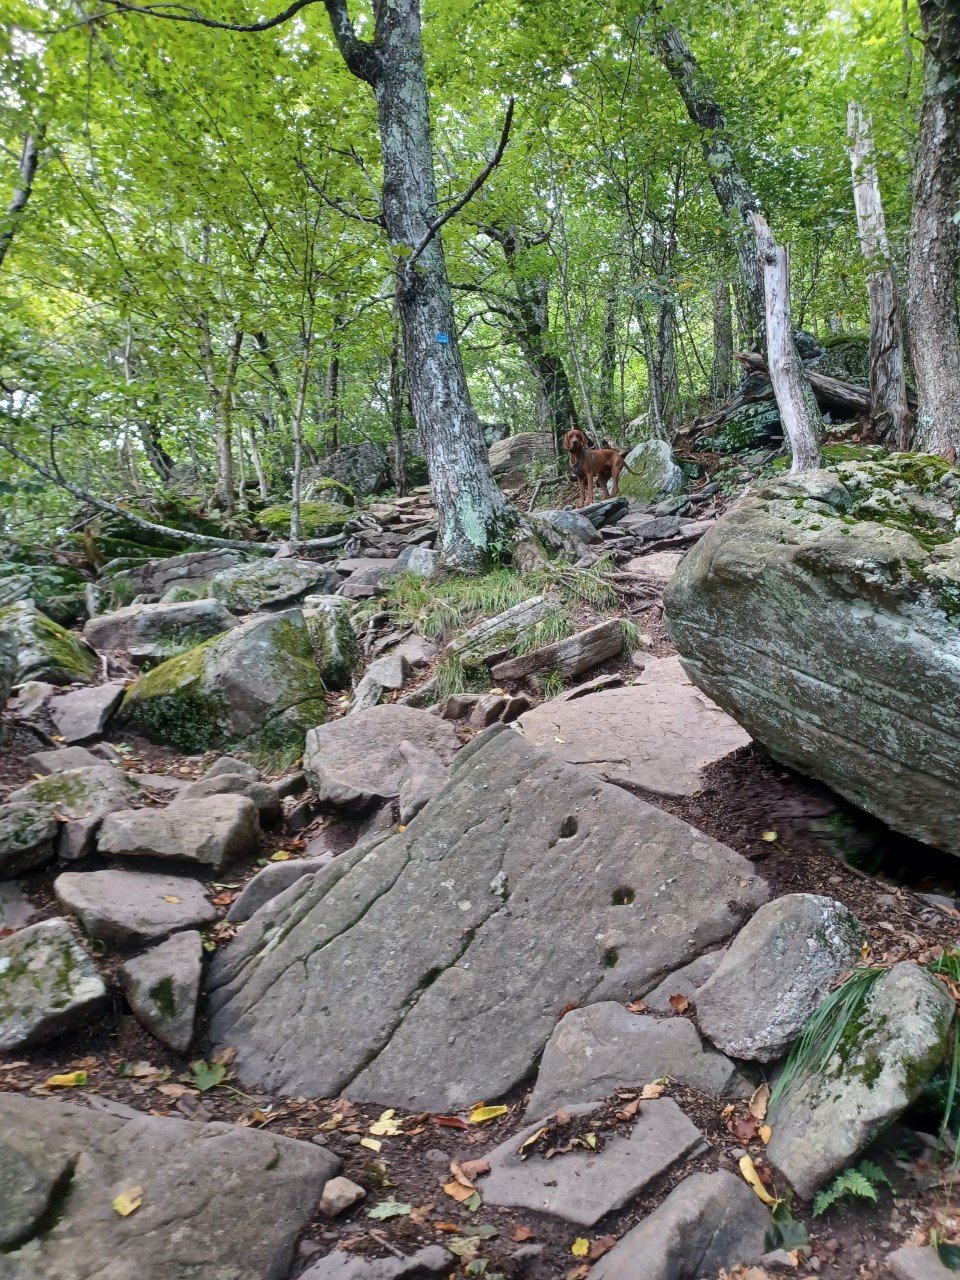 Towards the top of Giant Ledge trail, rock faces make the hike more challenging.